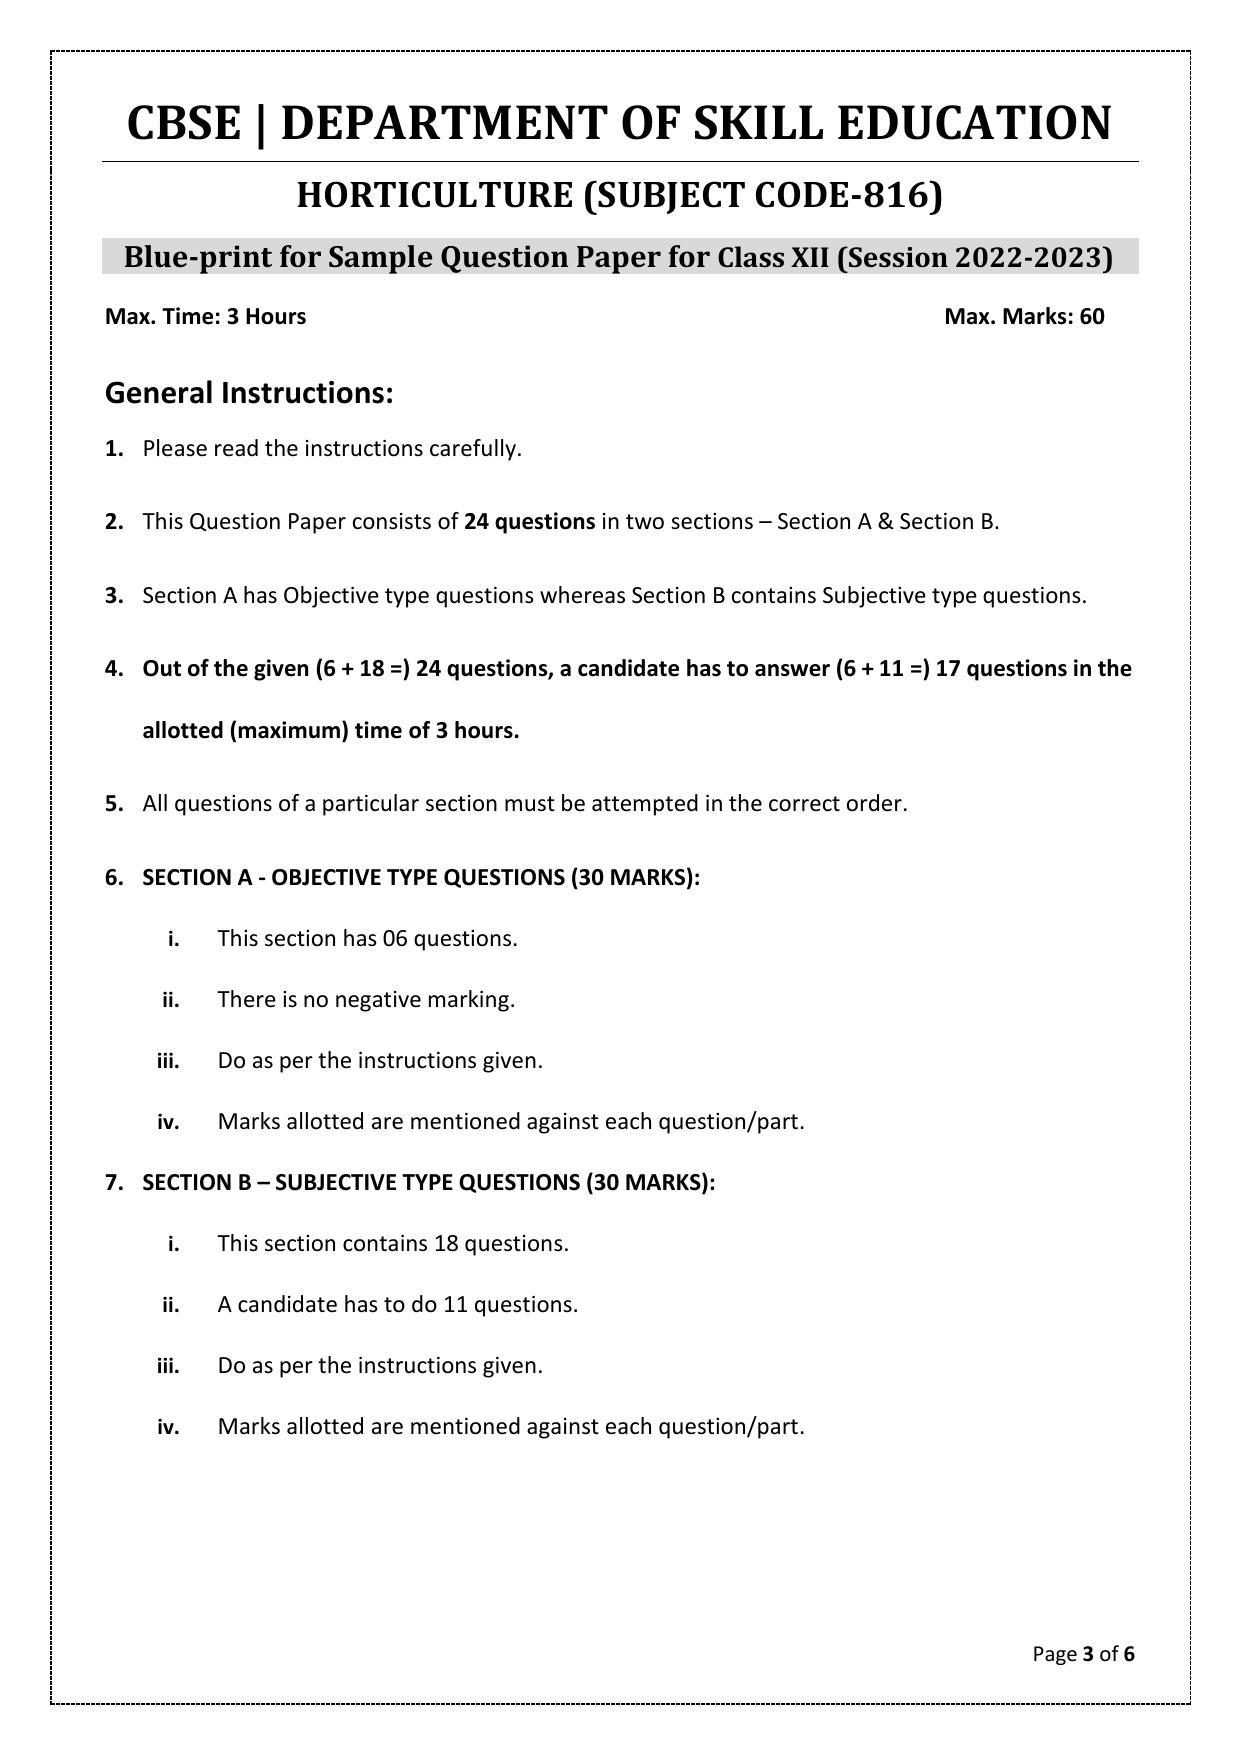 CBSE Class 10 Horticulture (Skill Education) Sample Papers 2023 - Page 3